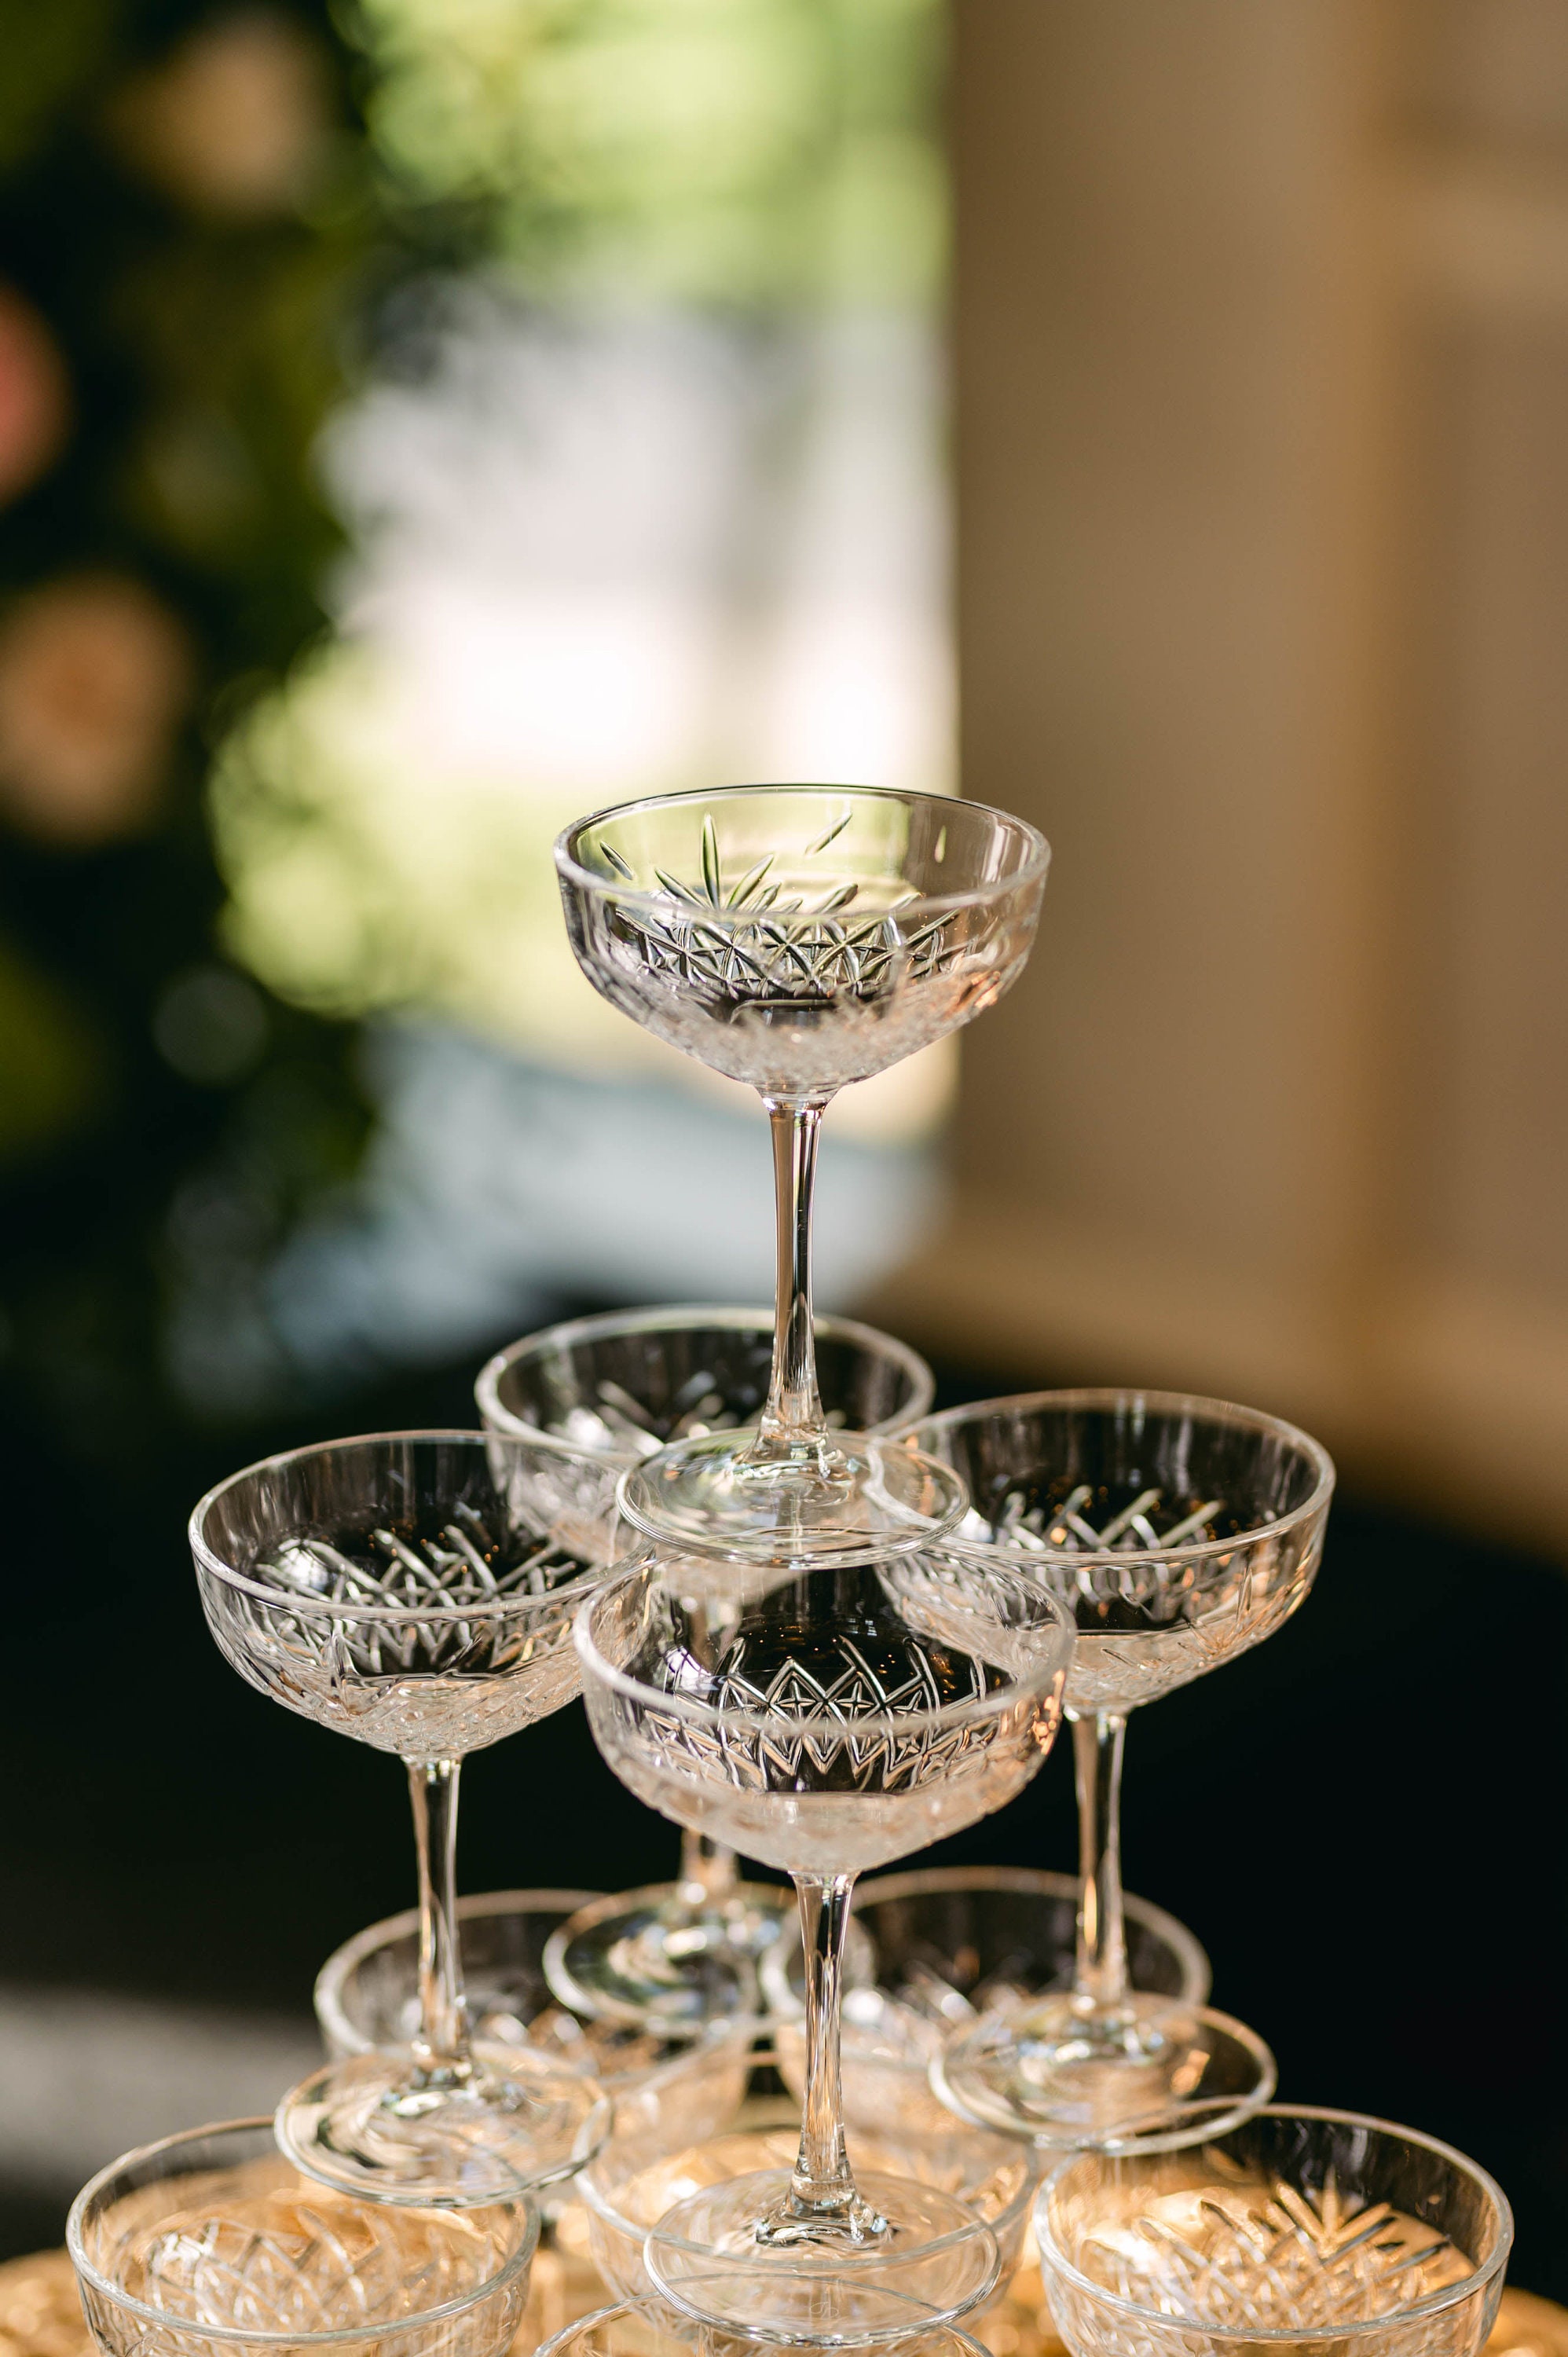 Set of 4 Cut Crystal-Style Coupe Champagne Tower Glasses | New Years Eve  Holiday Celebration or Romantic Wedding Decor Table scape Drinkware